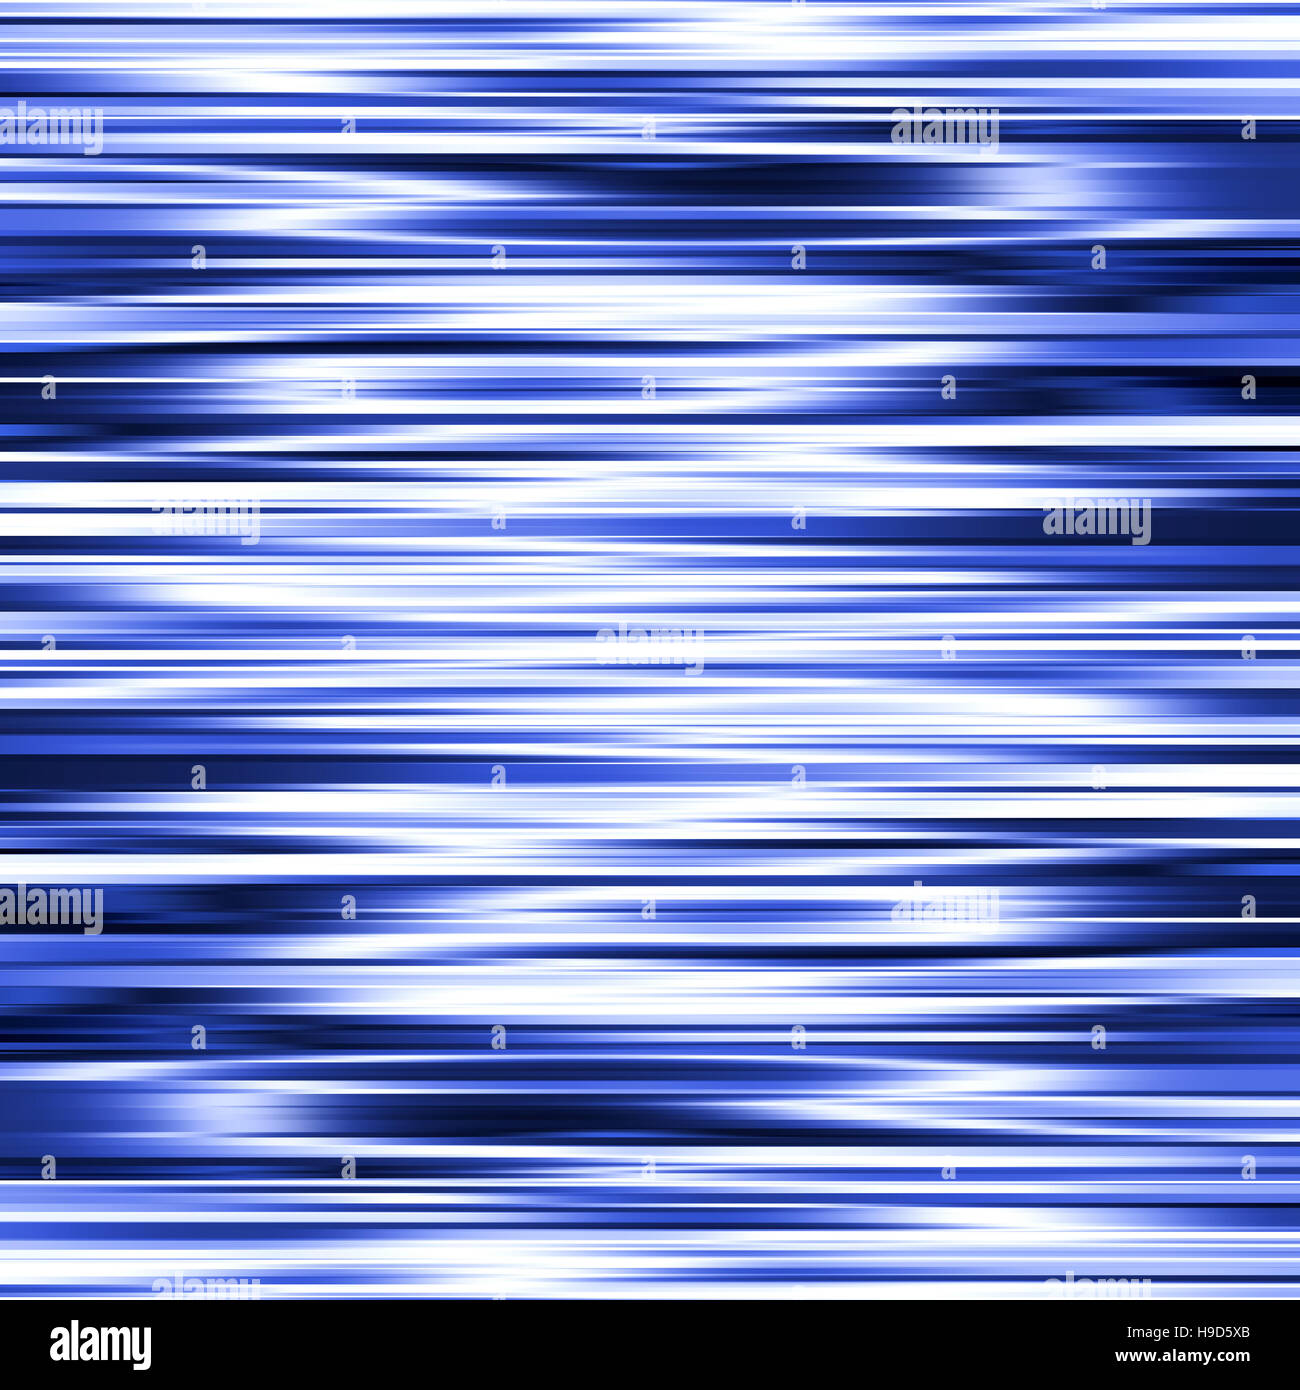 Blue colour ripples effect abstract background illustration. Stock Photo